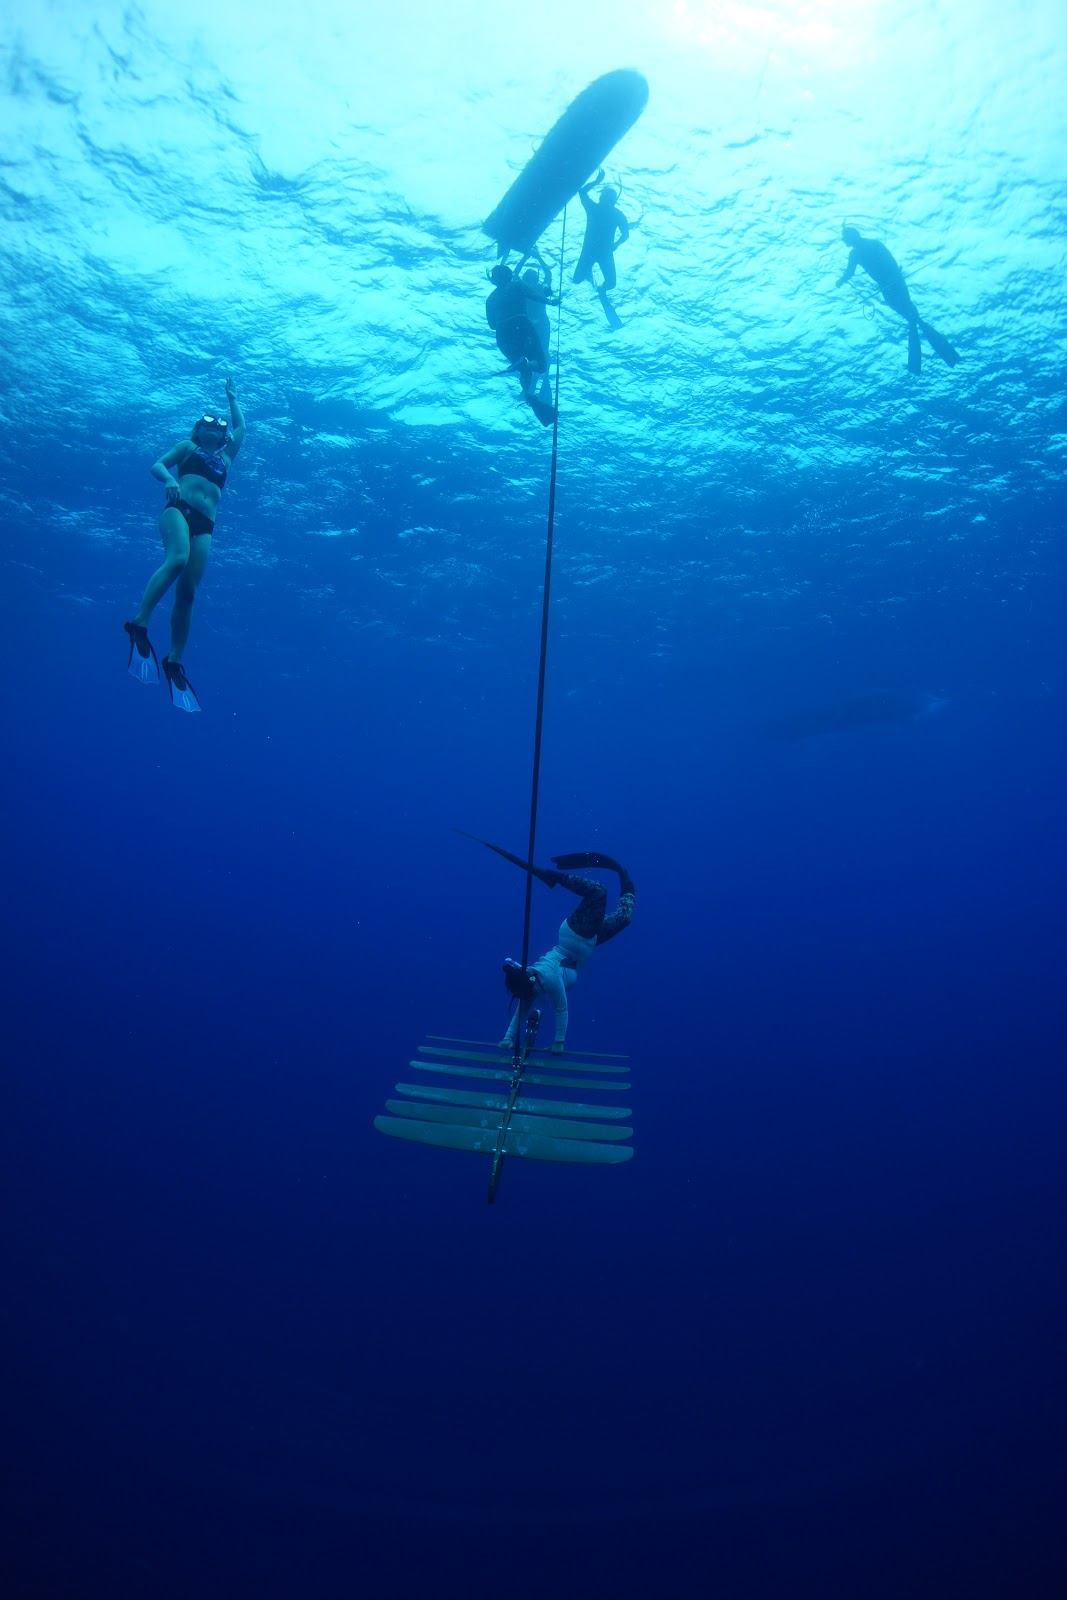 Flo freediving in Hawai’i while training how to use the wave glider with the team from the University of the Philippines.